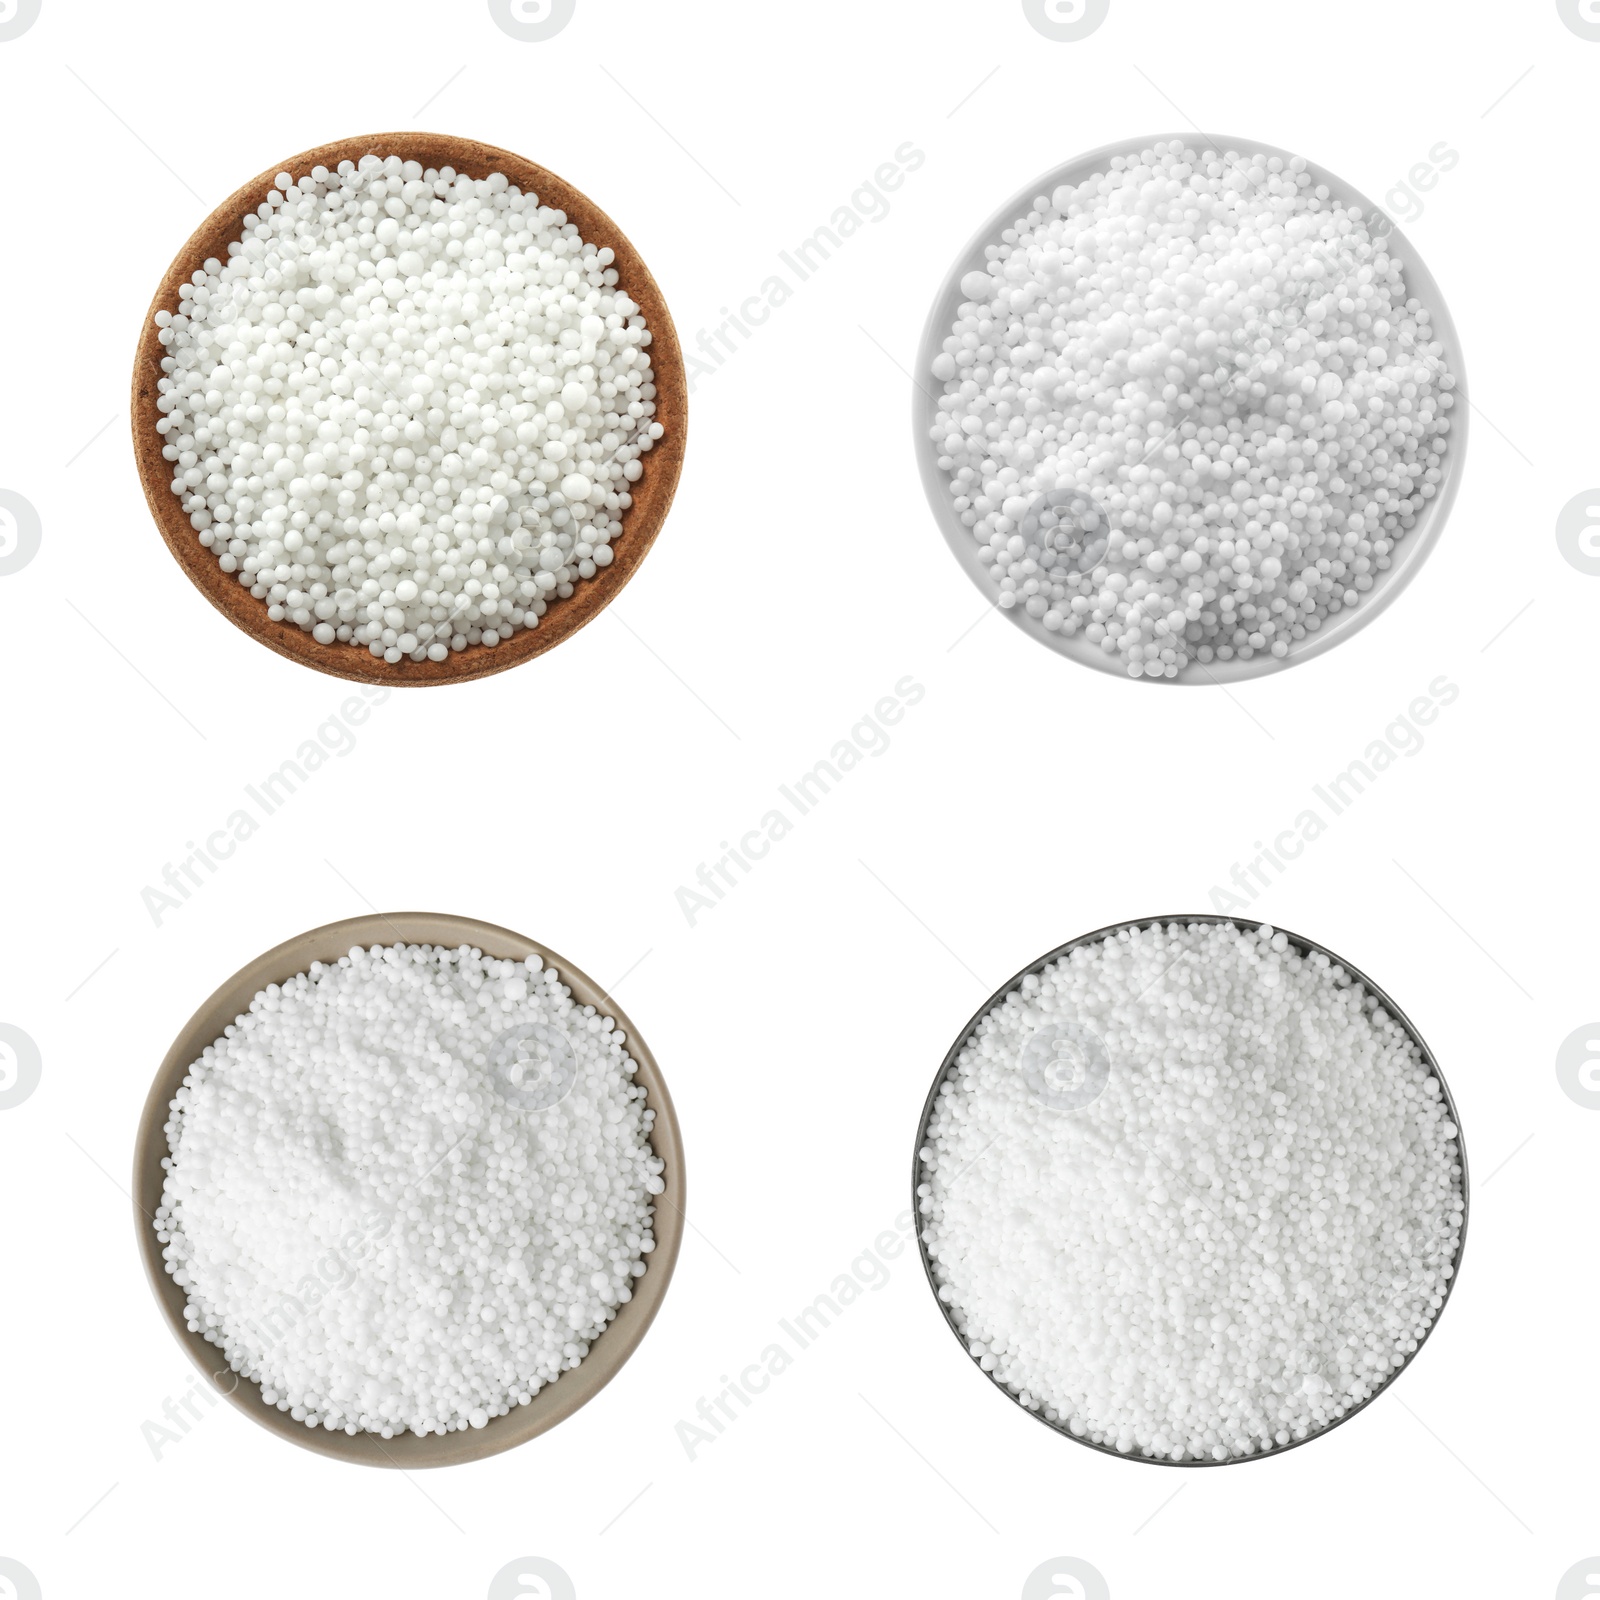 Image of Set with ammonium nitrate pellets in bowls on white background, top view. Mineral fertilizer